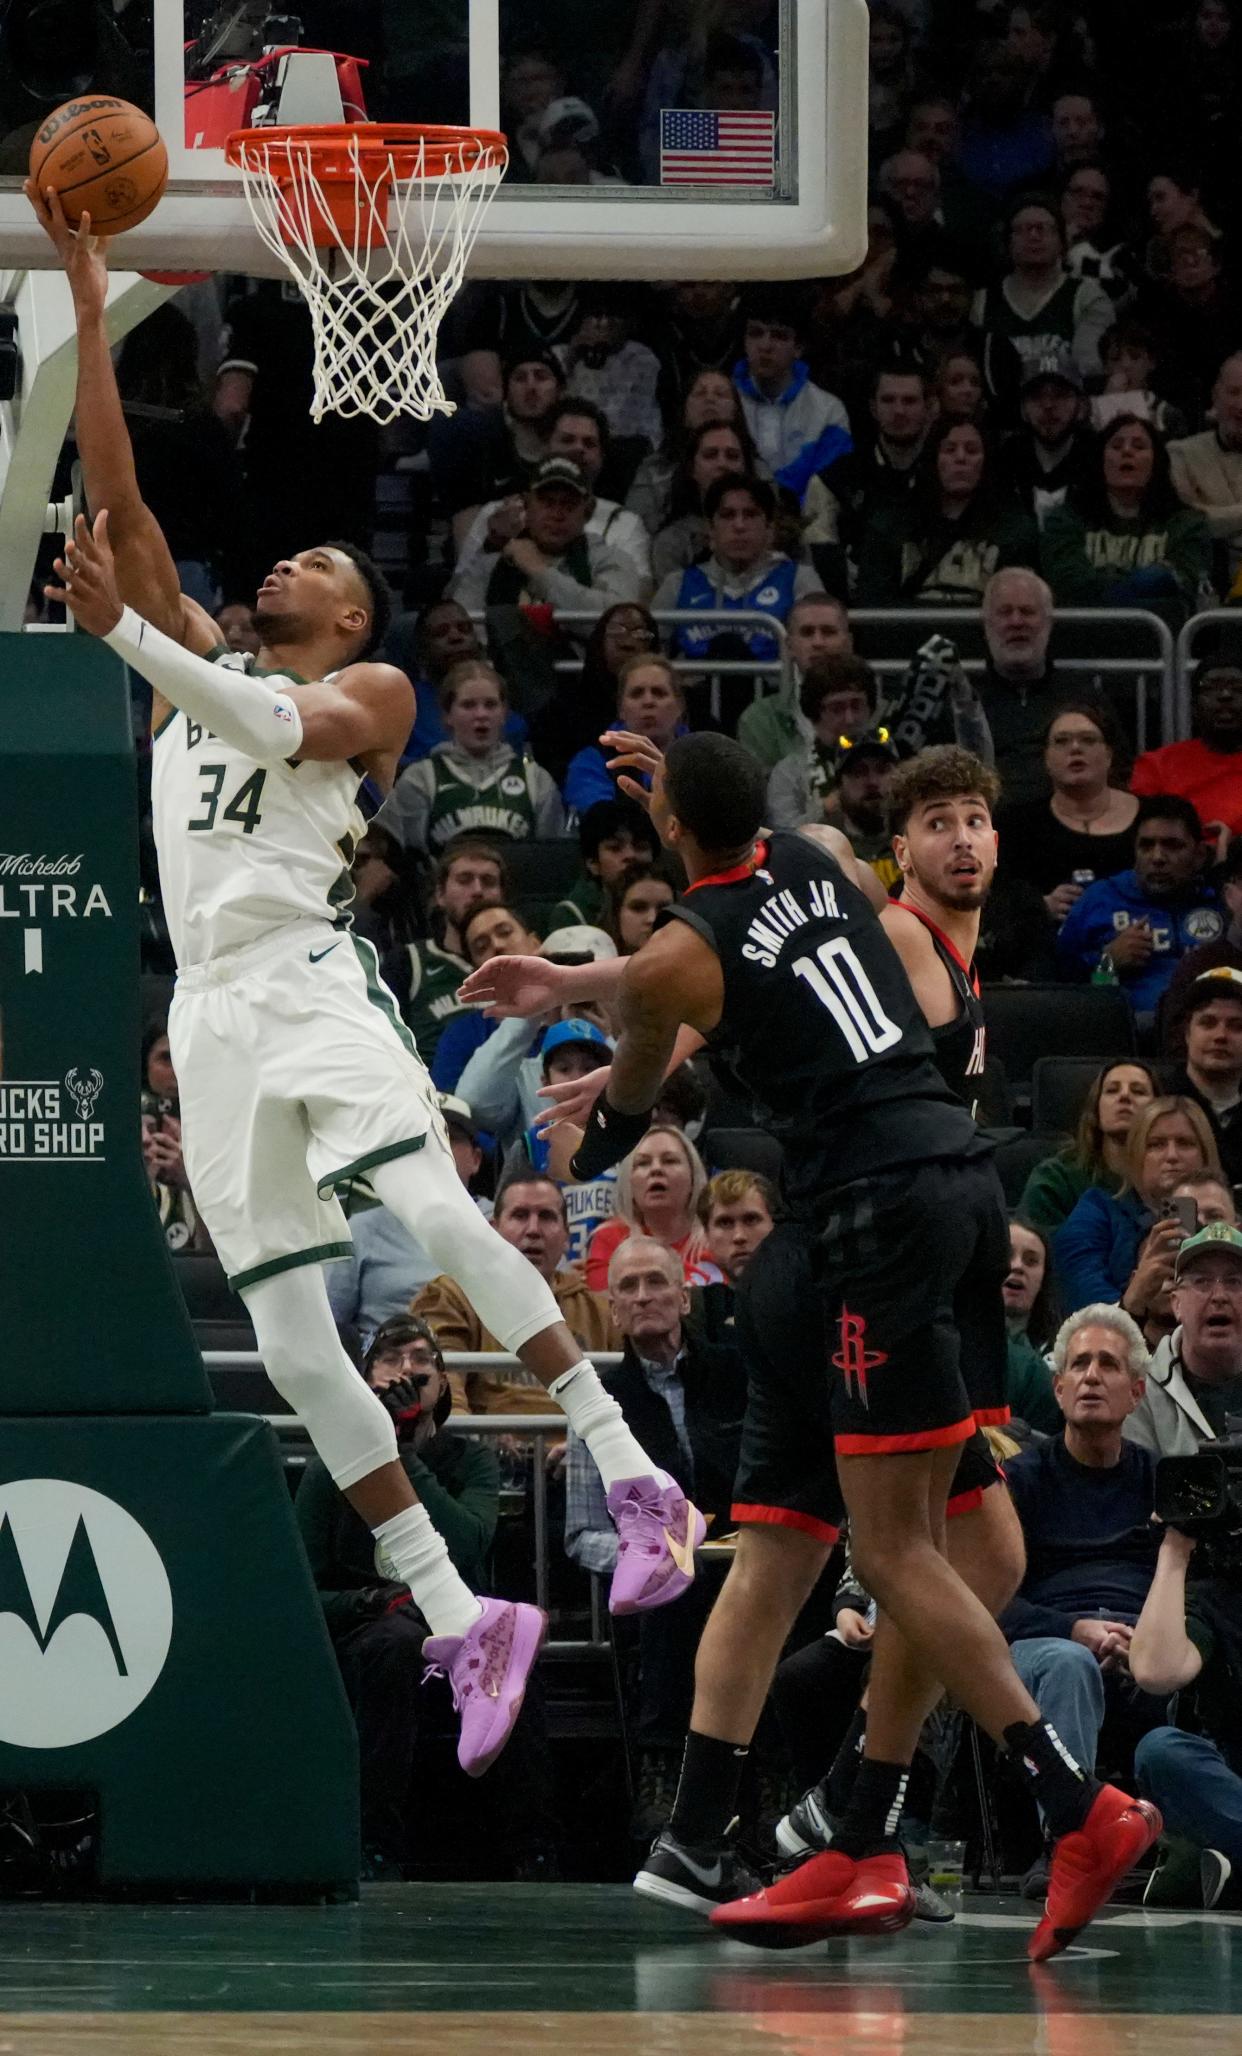 Giannis Antetokounmpo scored 26 points and grabbed 17 rebounds in the Milwaukee Bucks' 128-119 win over the Houston Rockets on Sunday.